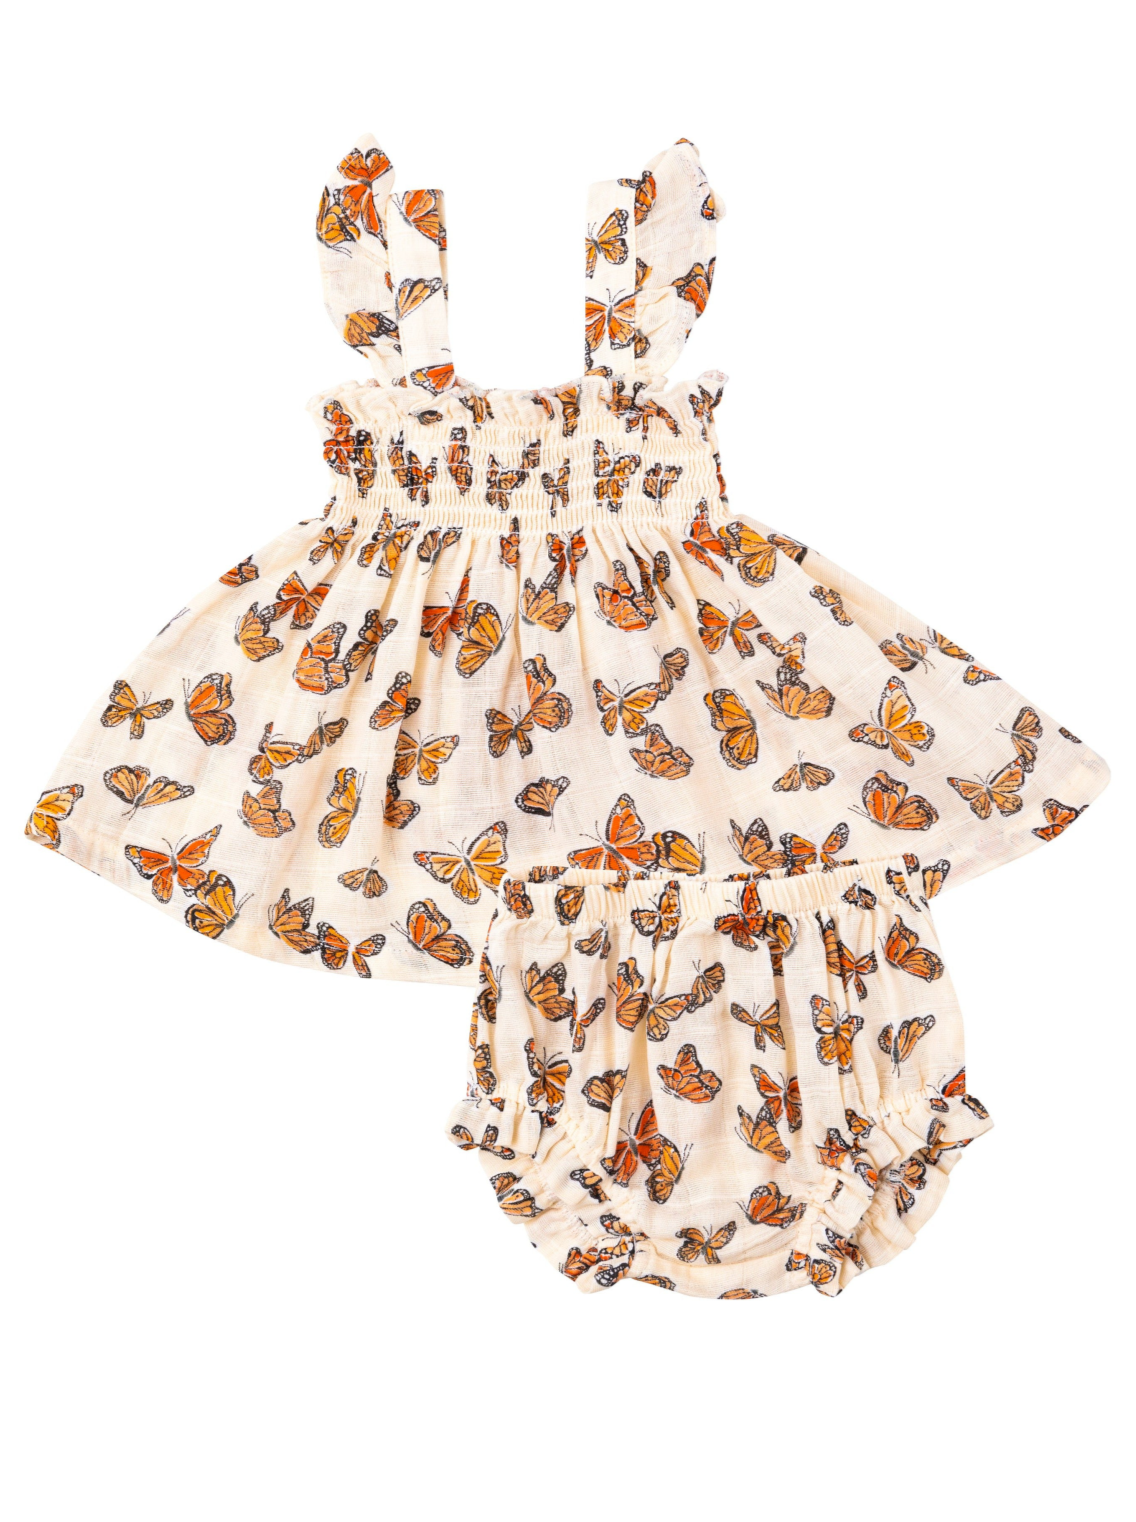 Ruffle Strap Smocked Top & Bloomer, Painted Monarch Butterflies